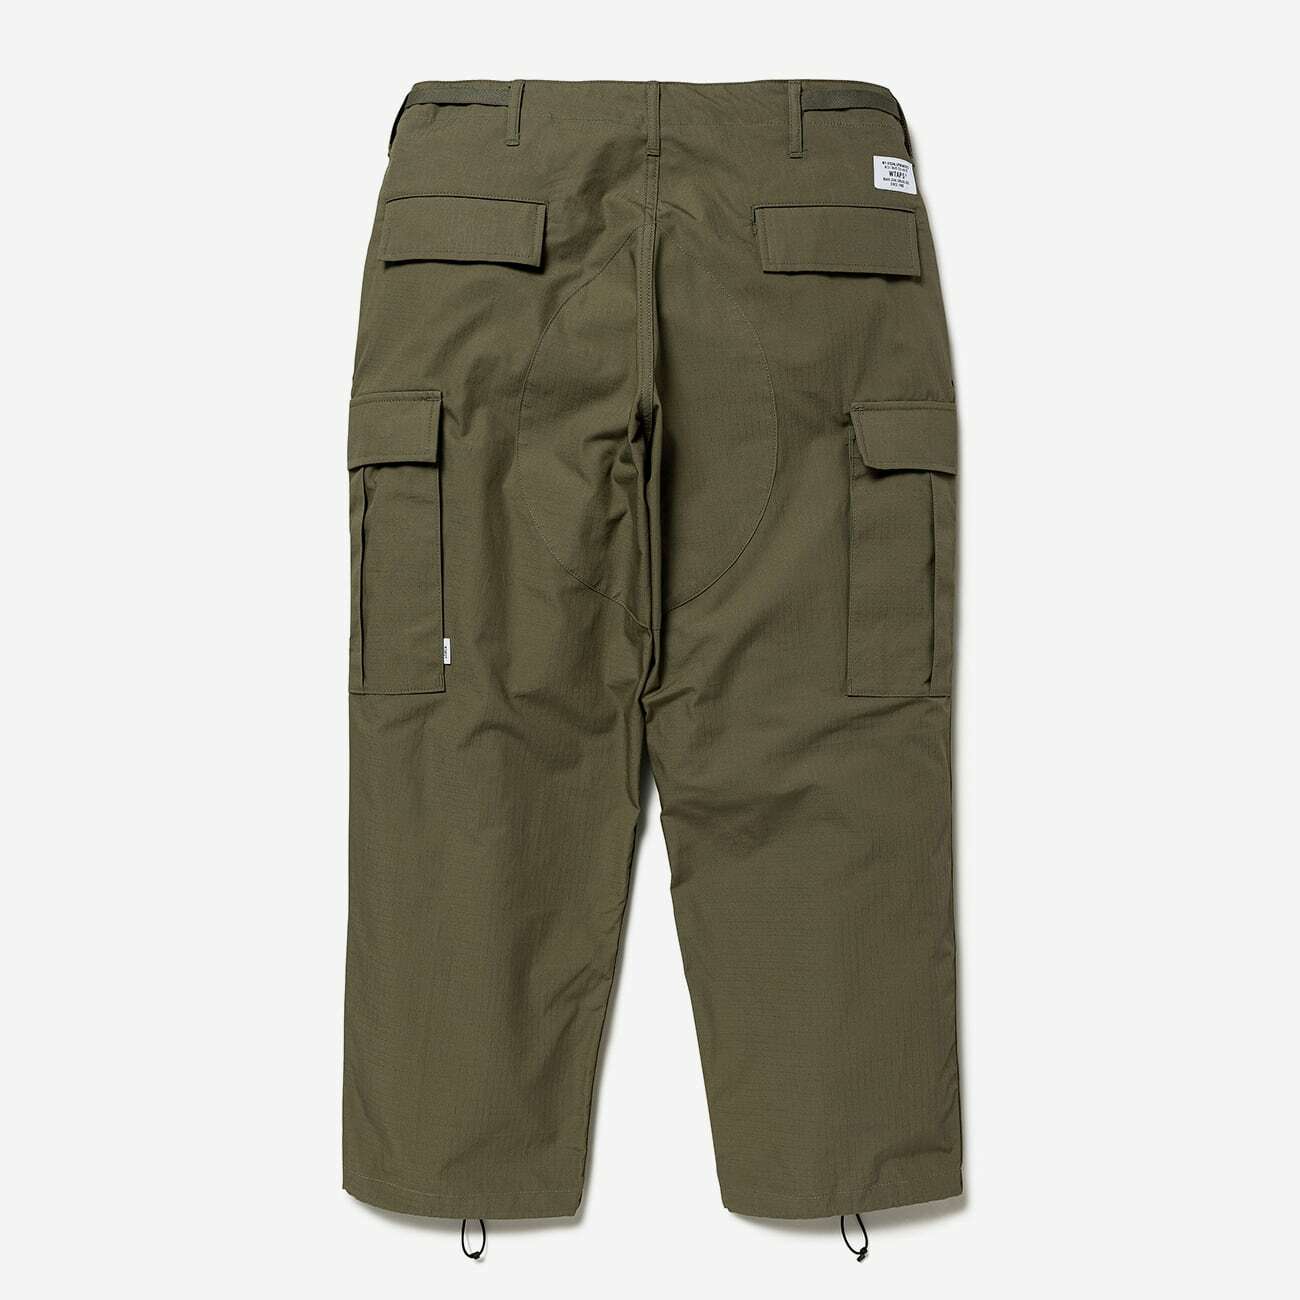 080120● 23ss WTAPS RIPSTOP TROUSERS 02